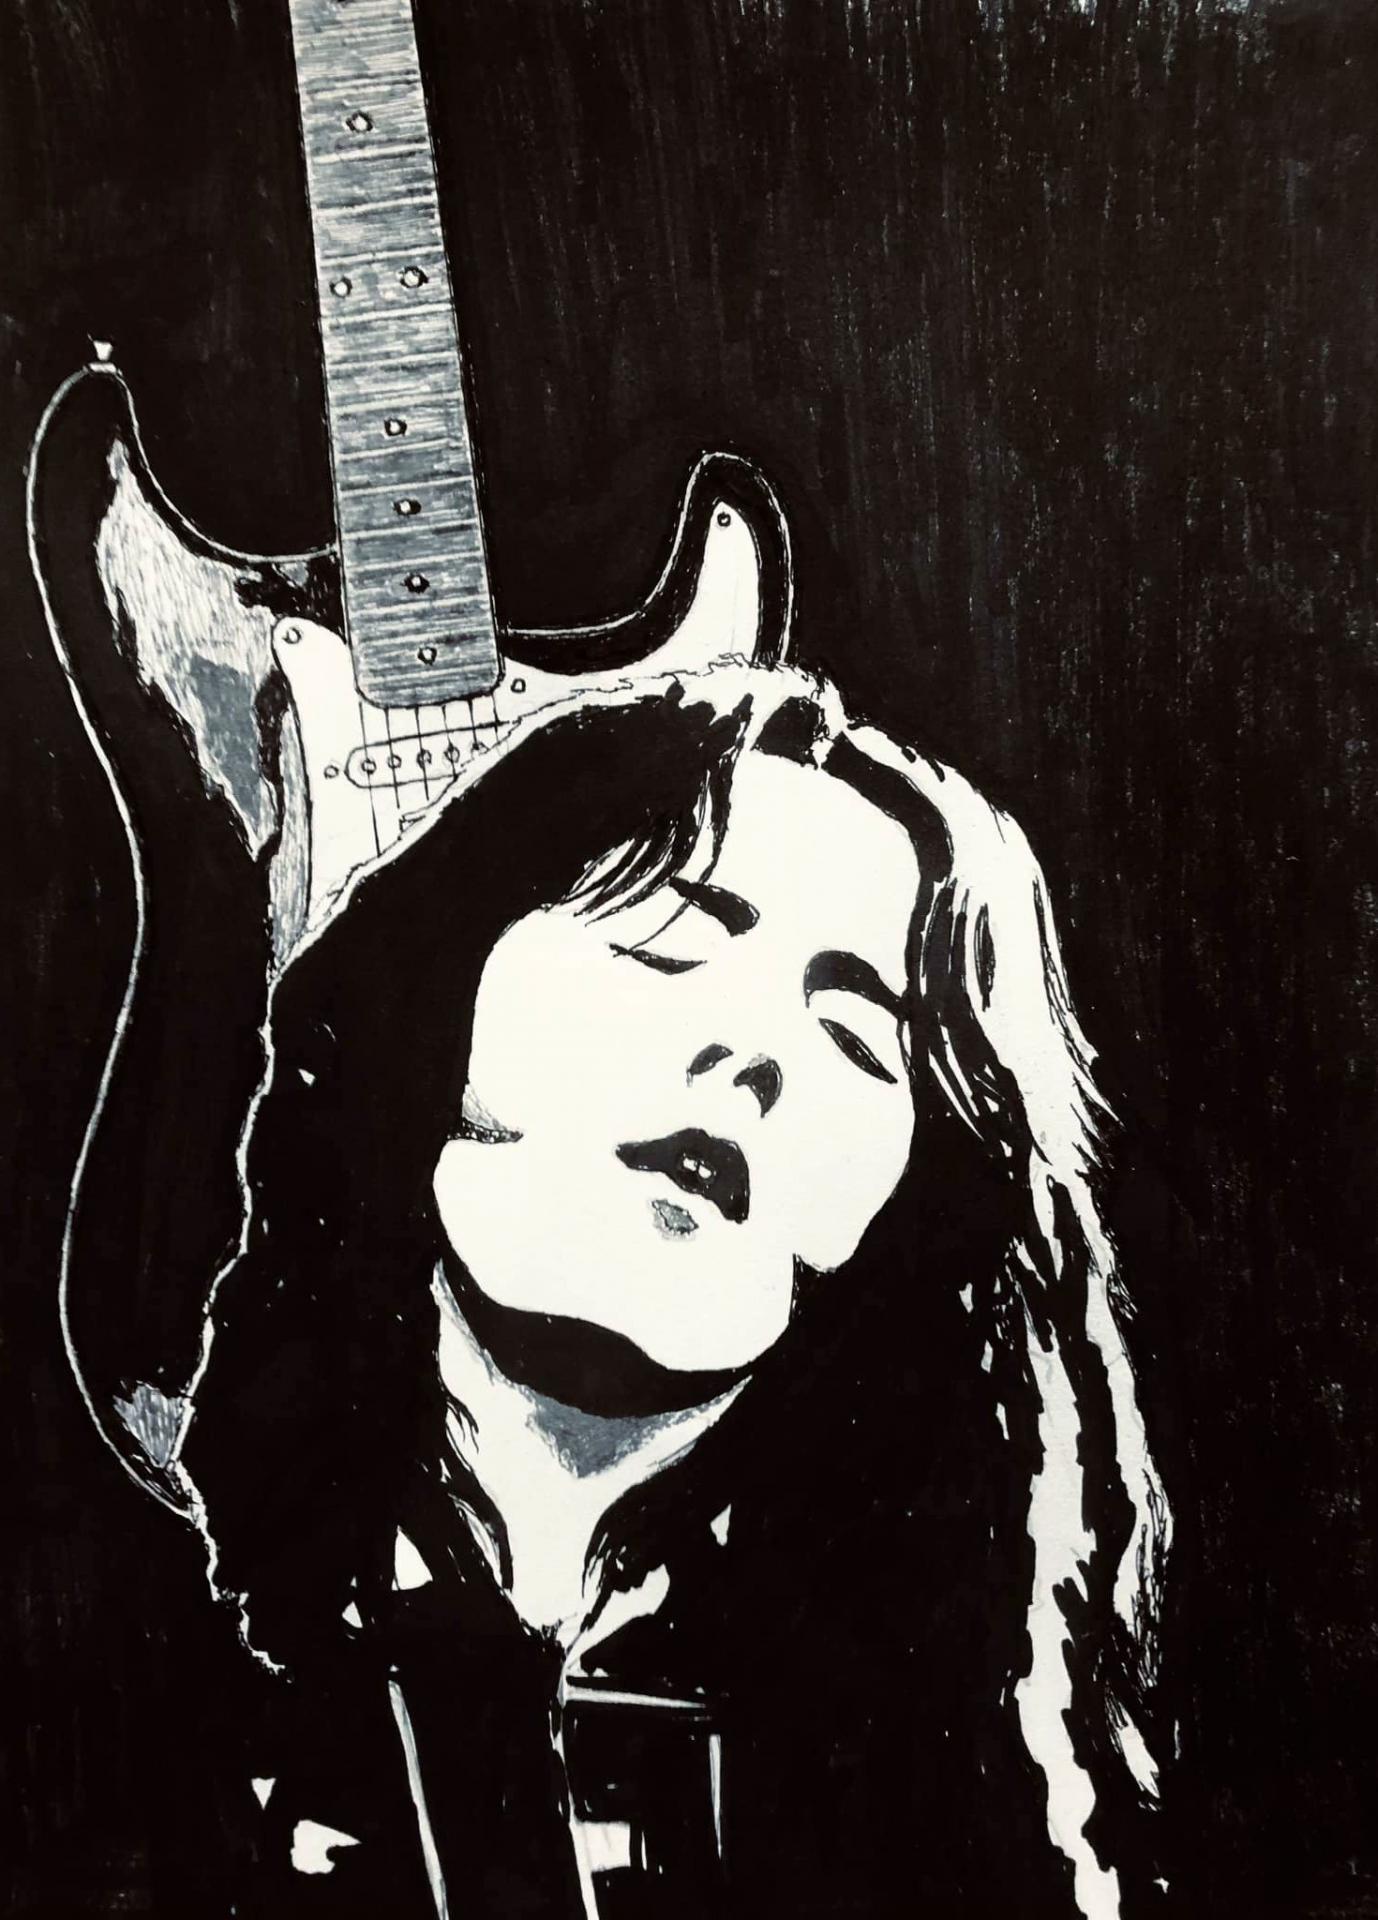 Rory gallagher